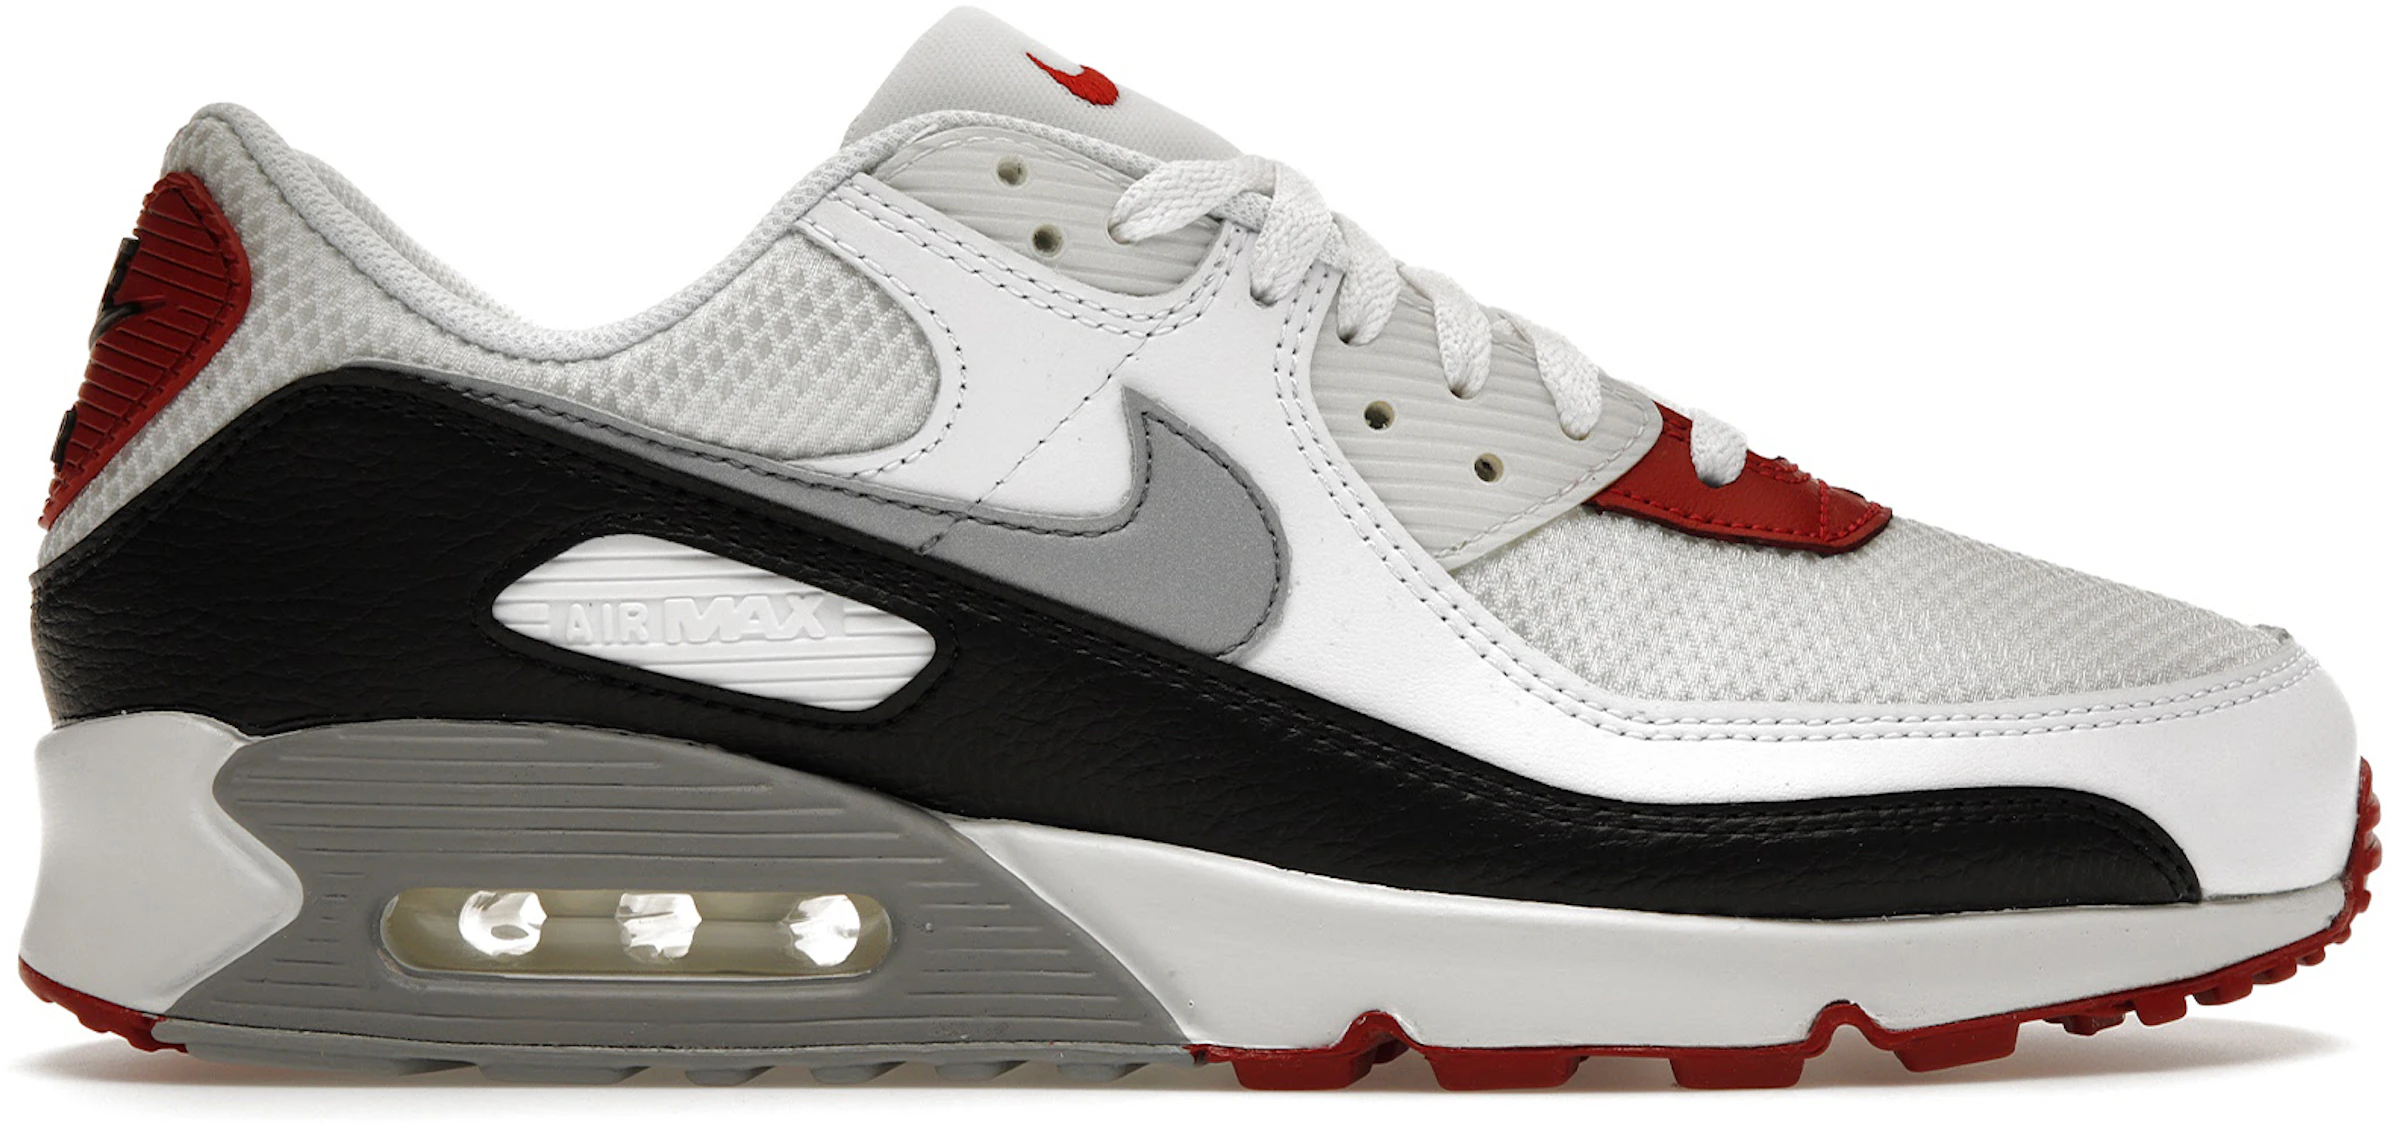 Buy Nike Air Max 90 Size 11 & New Sneakers -